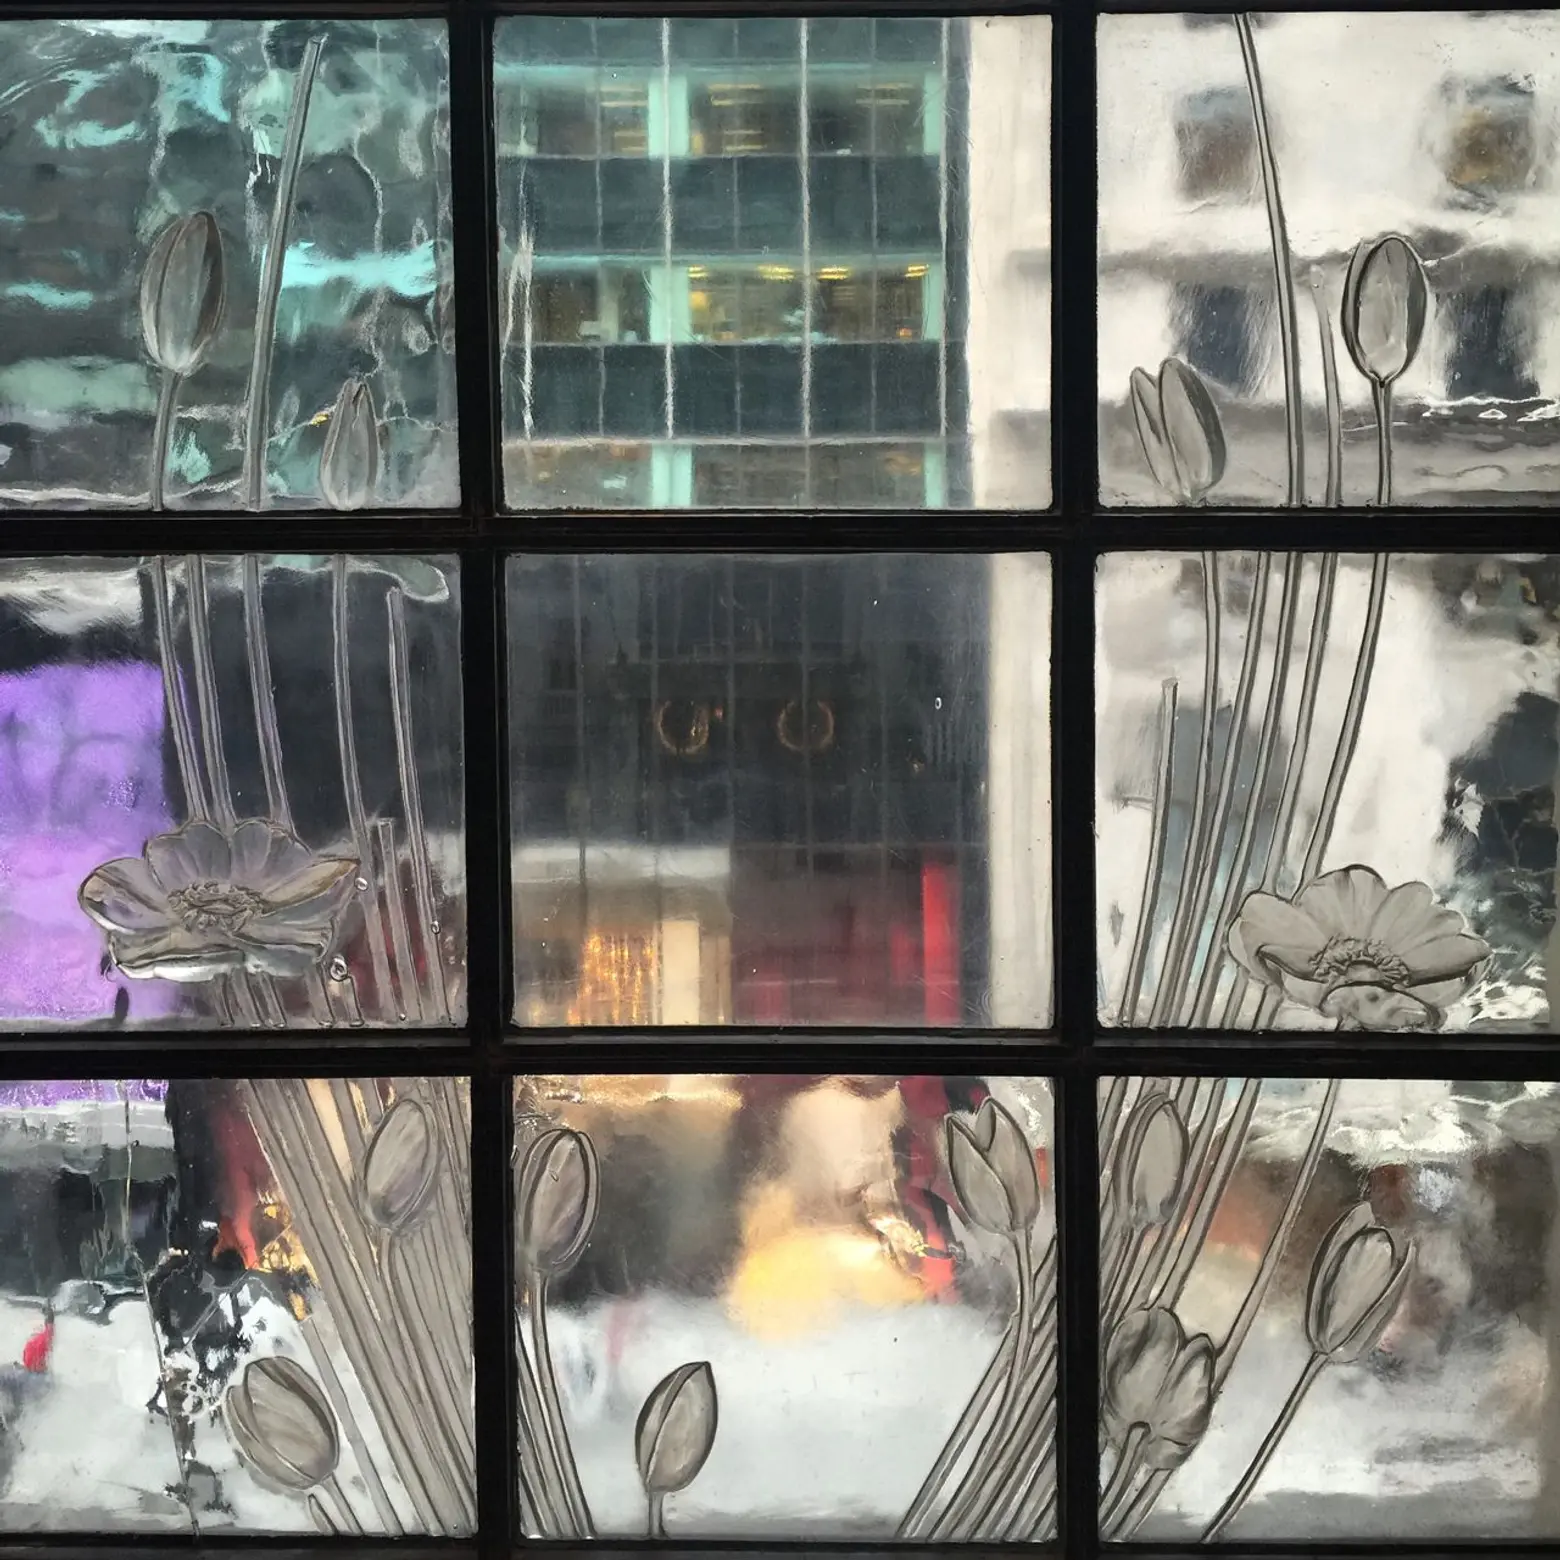 Rene Lalique window of Henri Bendel store, looking out over Fifth Avenue (2015)